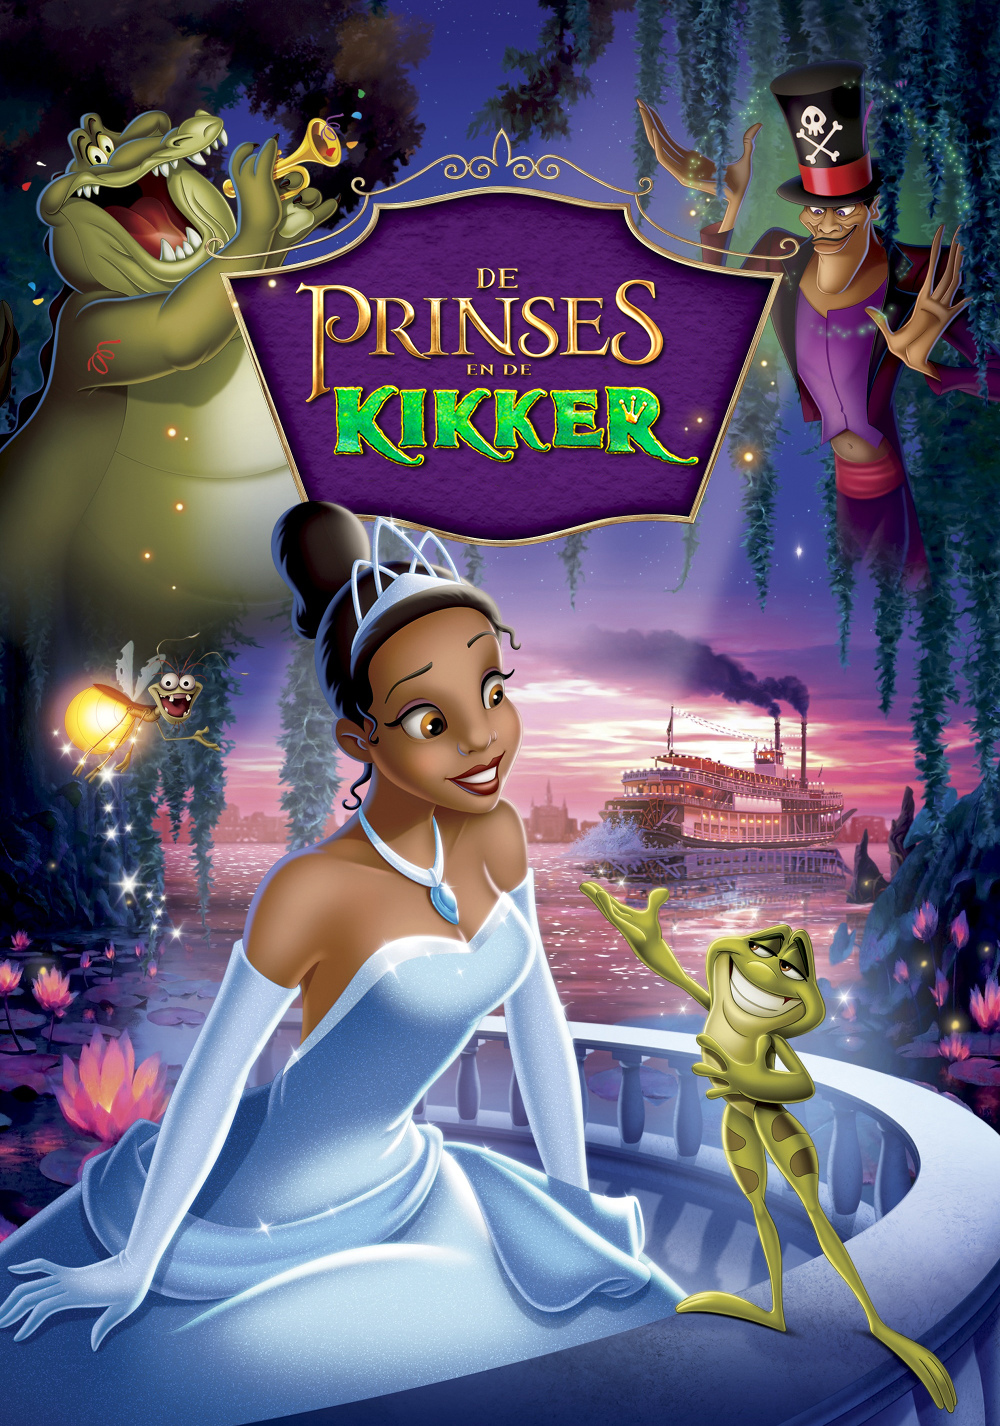 The Princess And The Frog Movie Poster - ID: 138773 - Image Abyss.